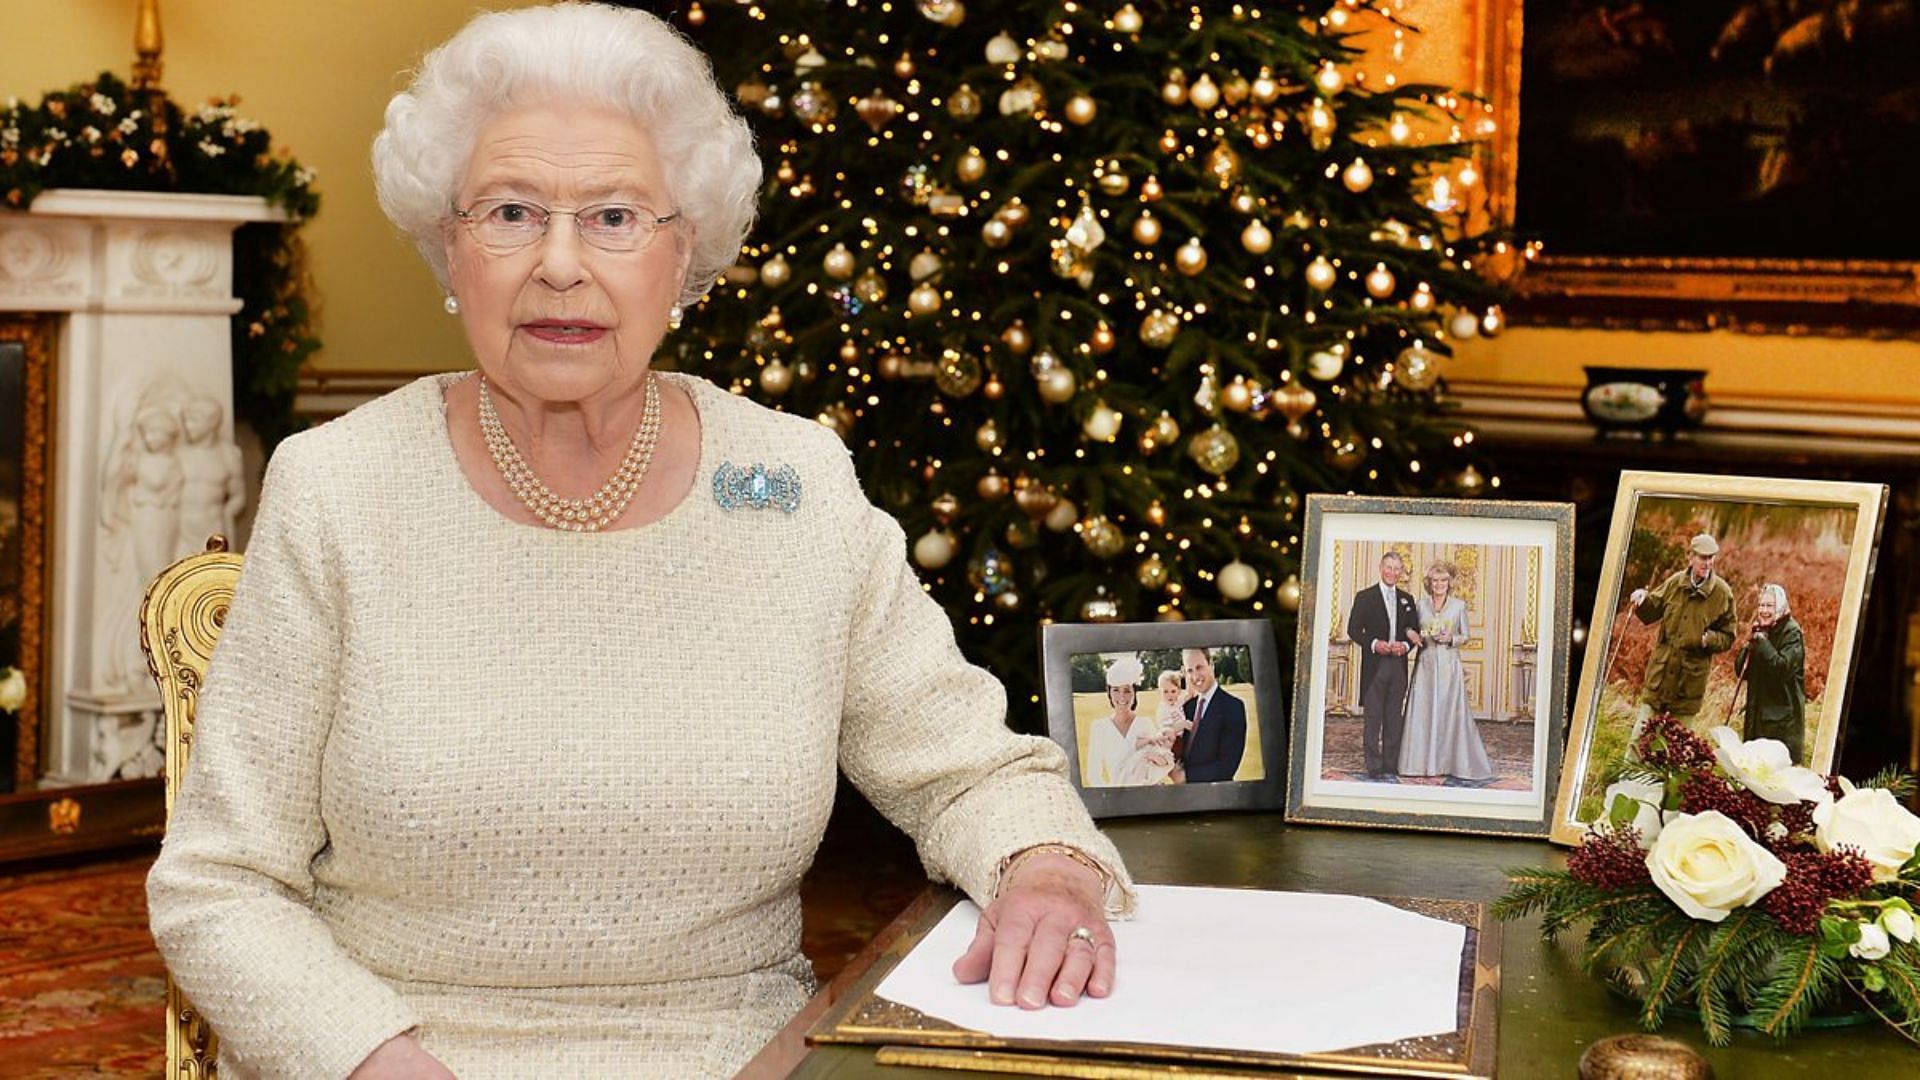 The Queen at the Christmas broadcast (Image via BBC)